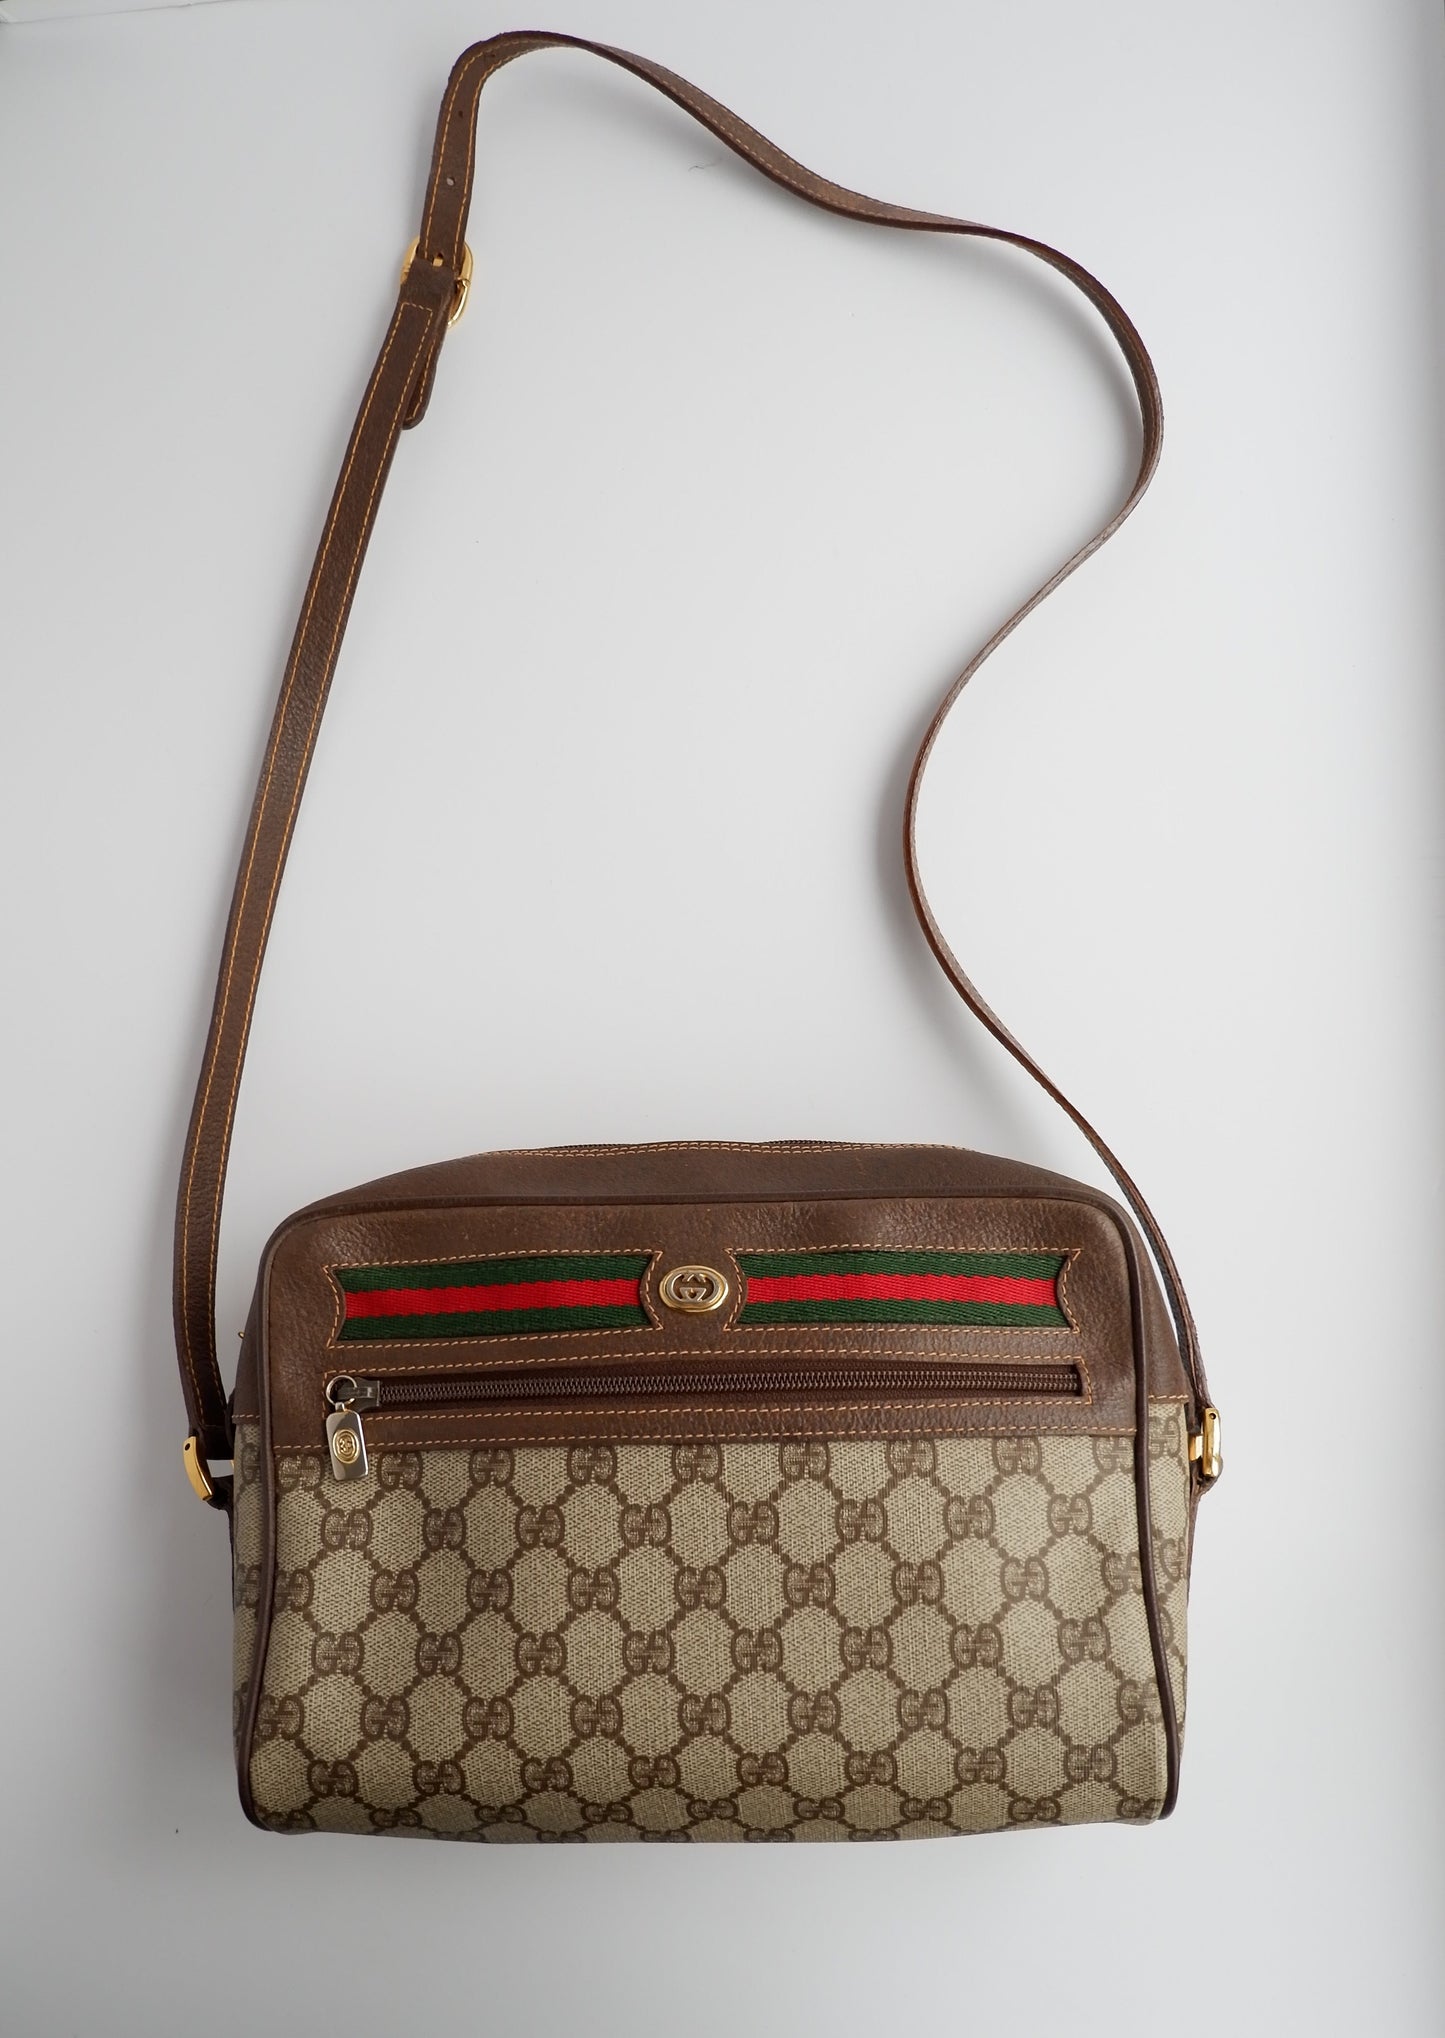 Authentic Preowned Vintage Gucci GG Canvas Crossbody Bag